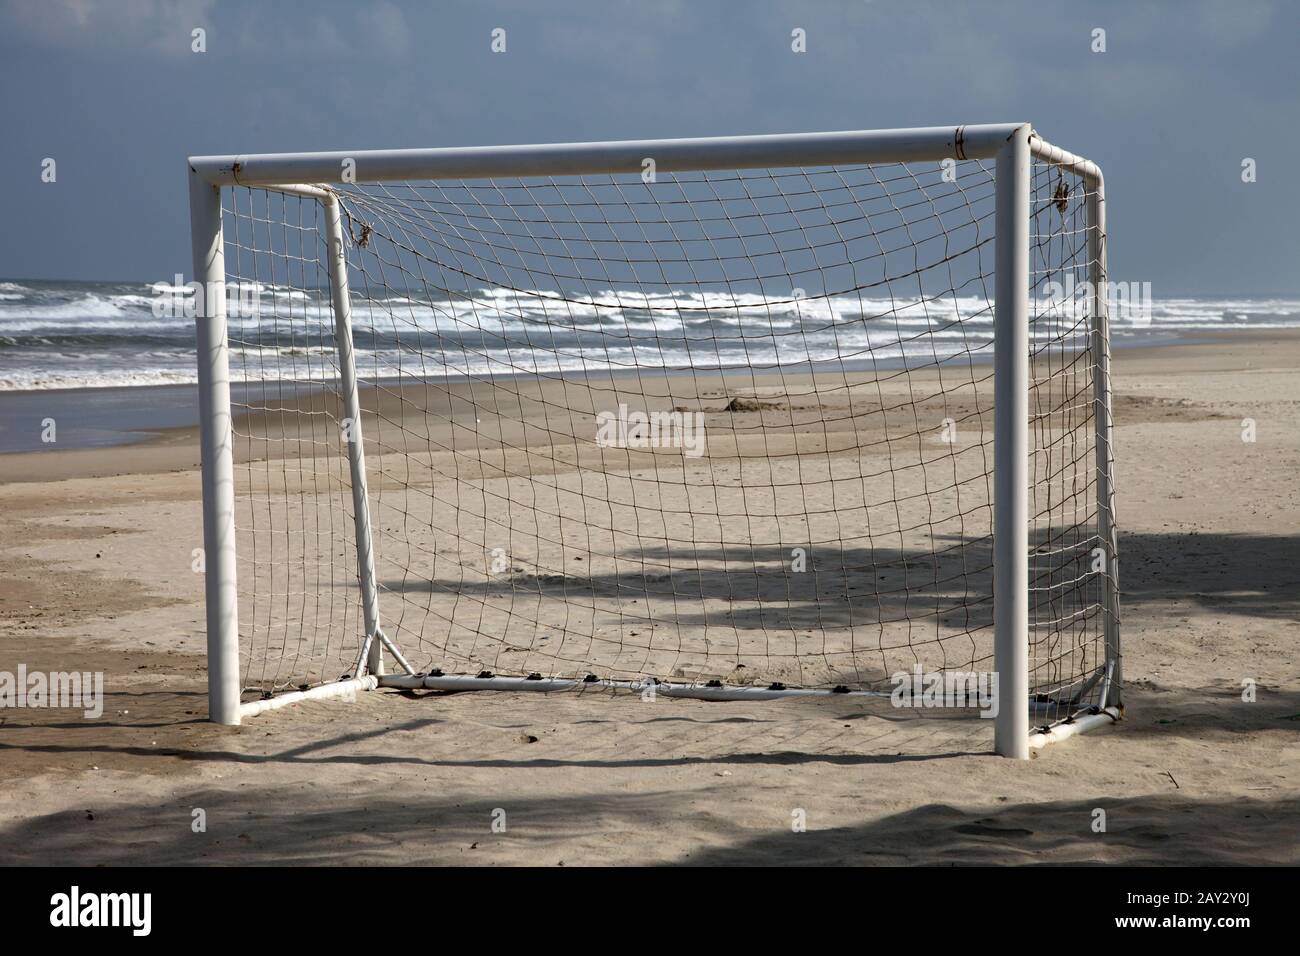 empty goal of a football or soccer playroung on the beach near the see on thesand Stock Photo